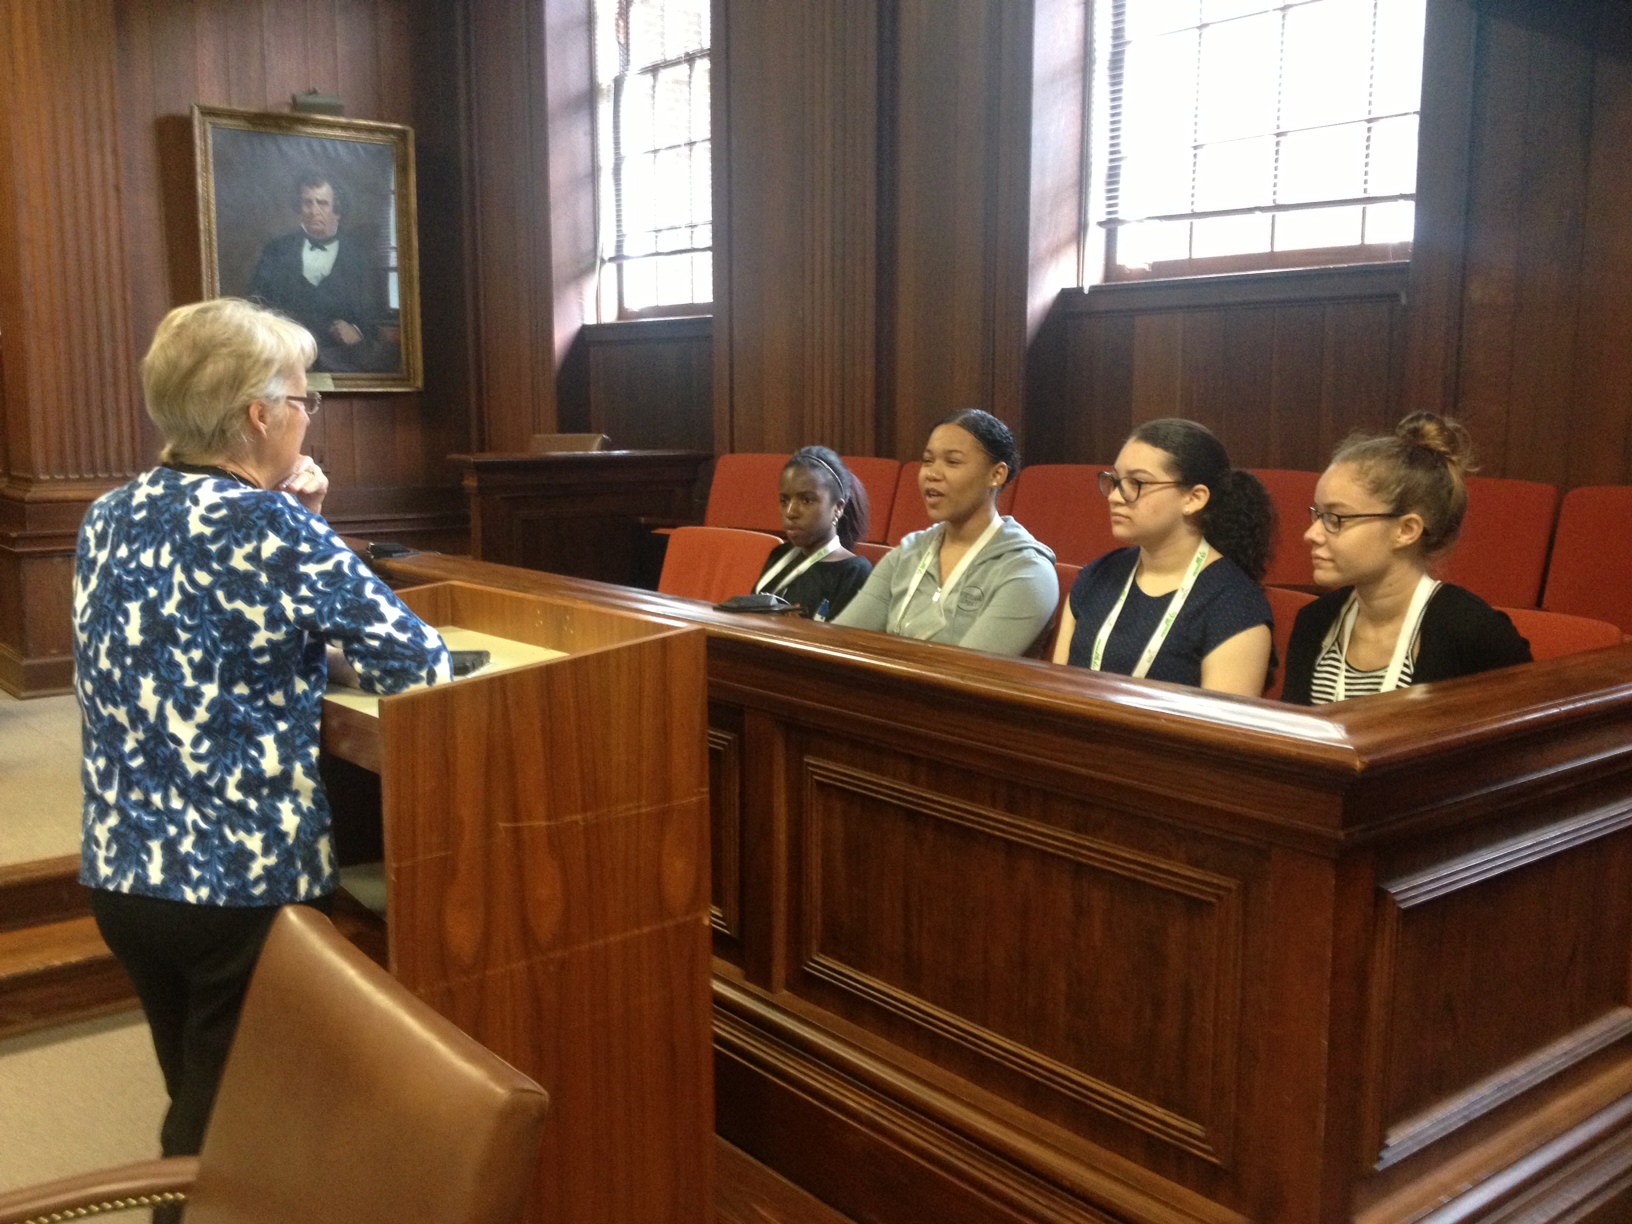 Professor Rothstein speaks with the high school students in the Allen Courtroom. Left to right, they are: Gabrielle Alston, Mahagoni Richardson, Makayla Rankin and Sierra Daniels.